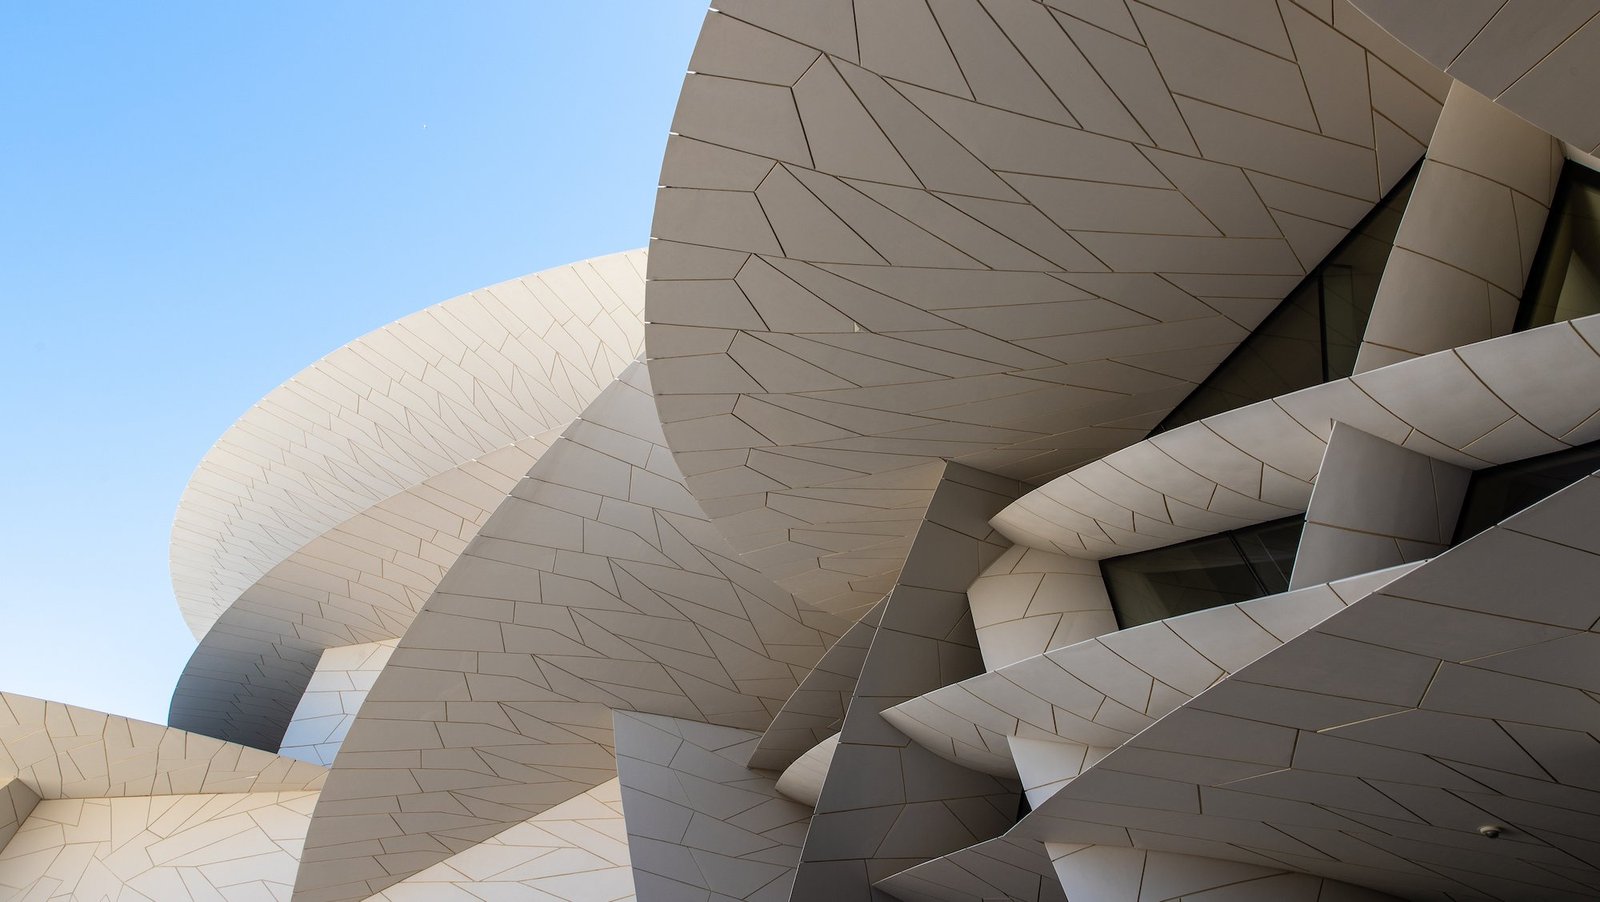 Introducing the National Museum of Qatar